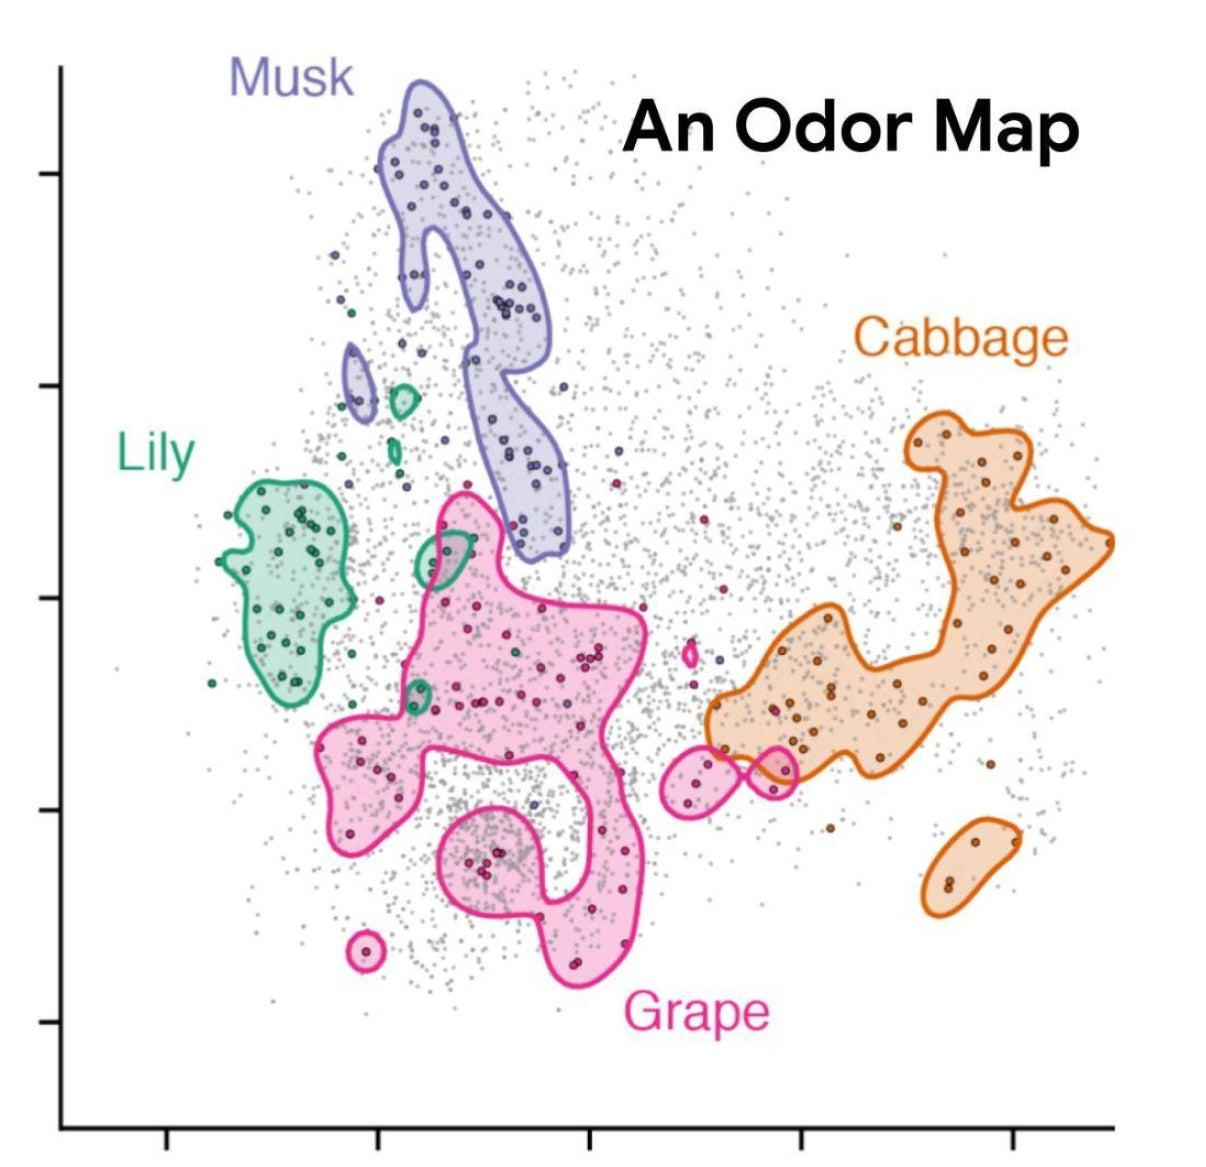 An illustration of the odor map (musk, lily, cabbage and grape)